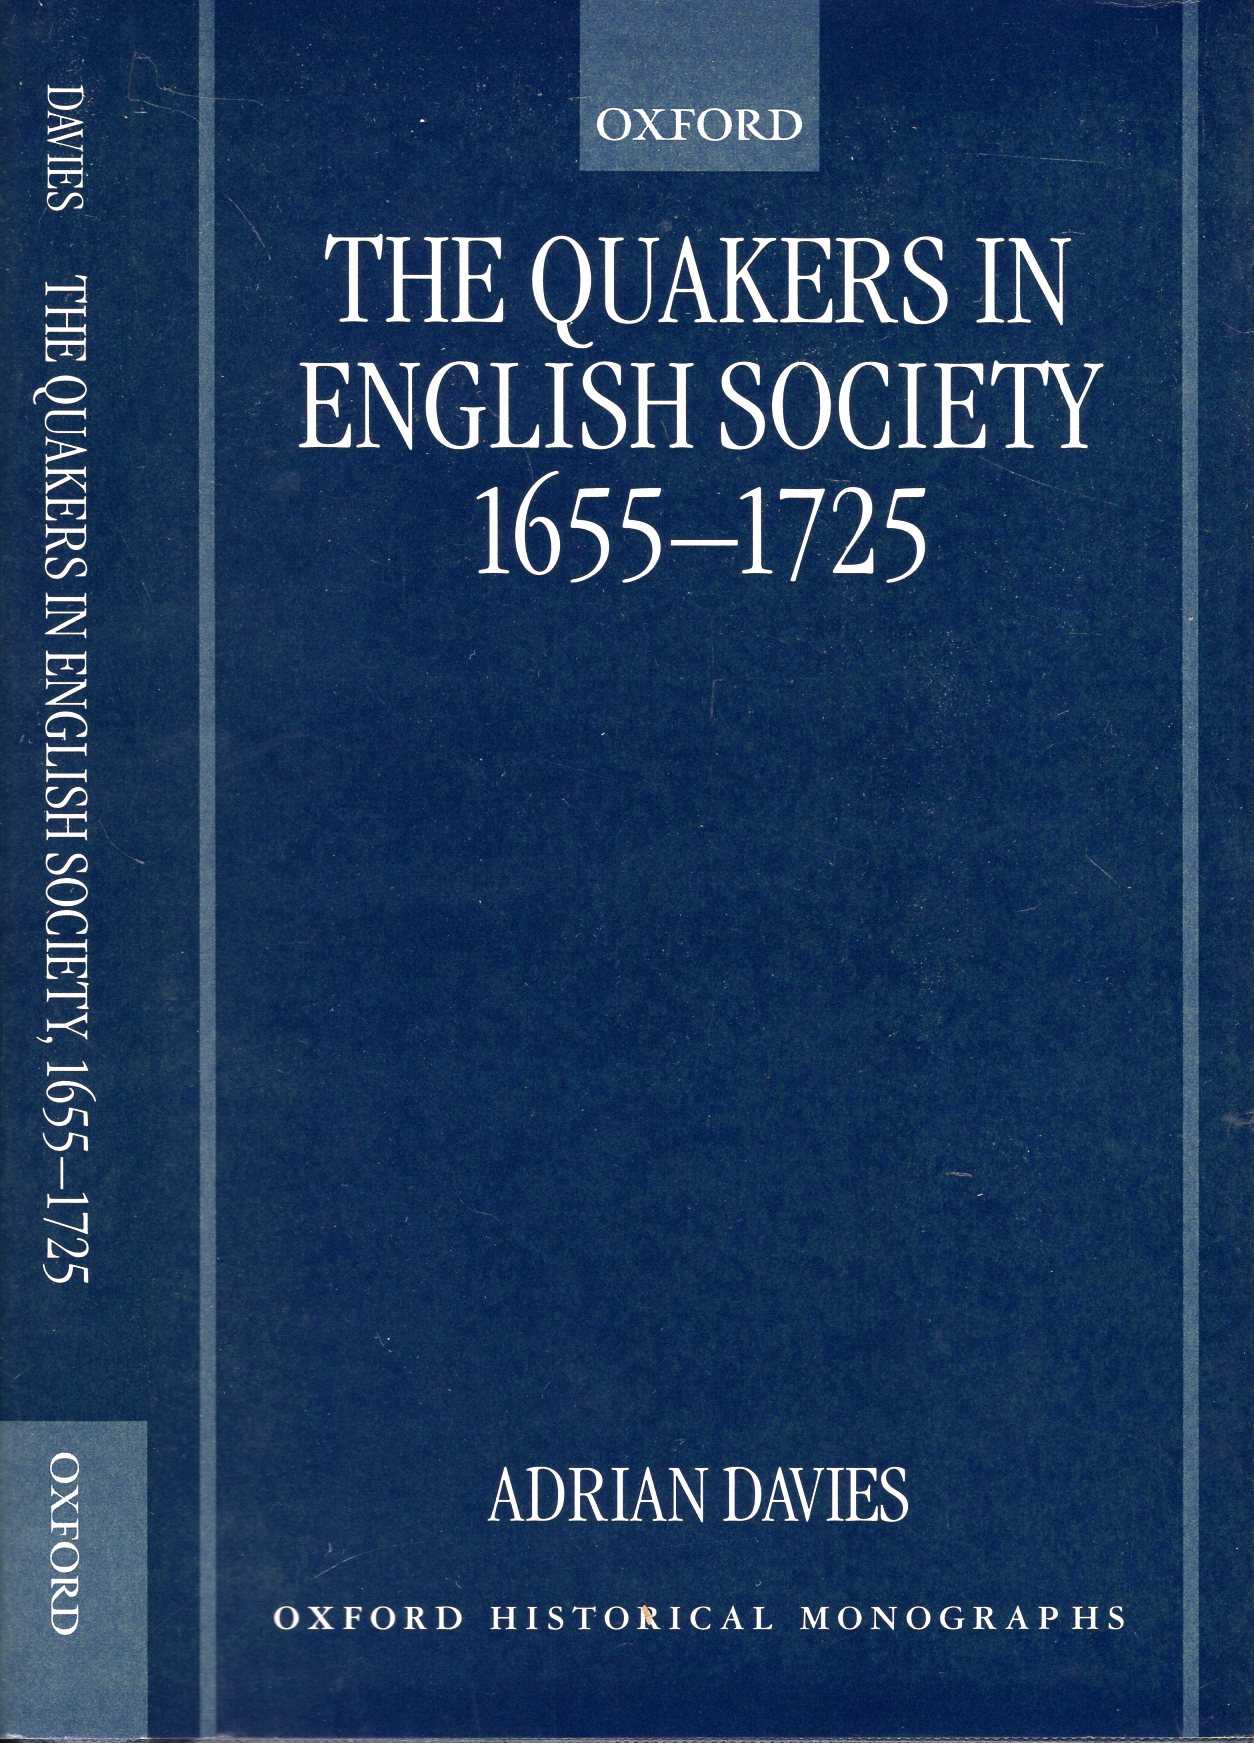 Image for The Quakers in English Society, 1655-1725 (Oxford Historical Monographs)